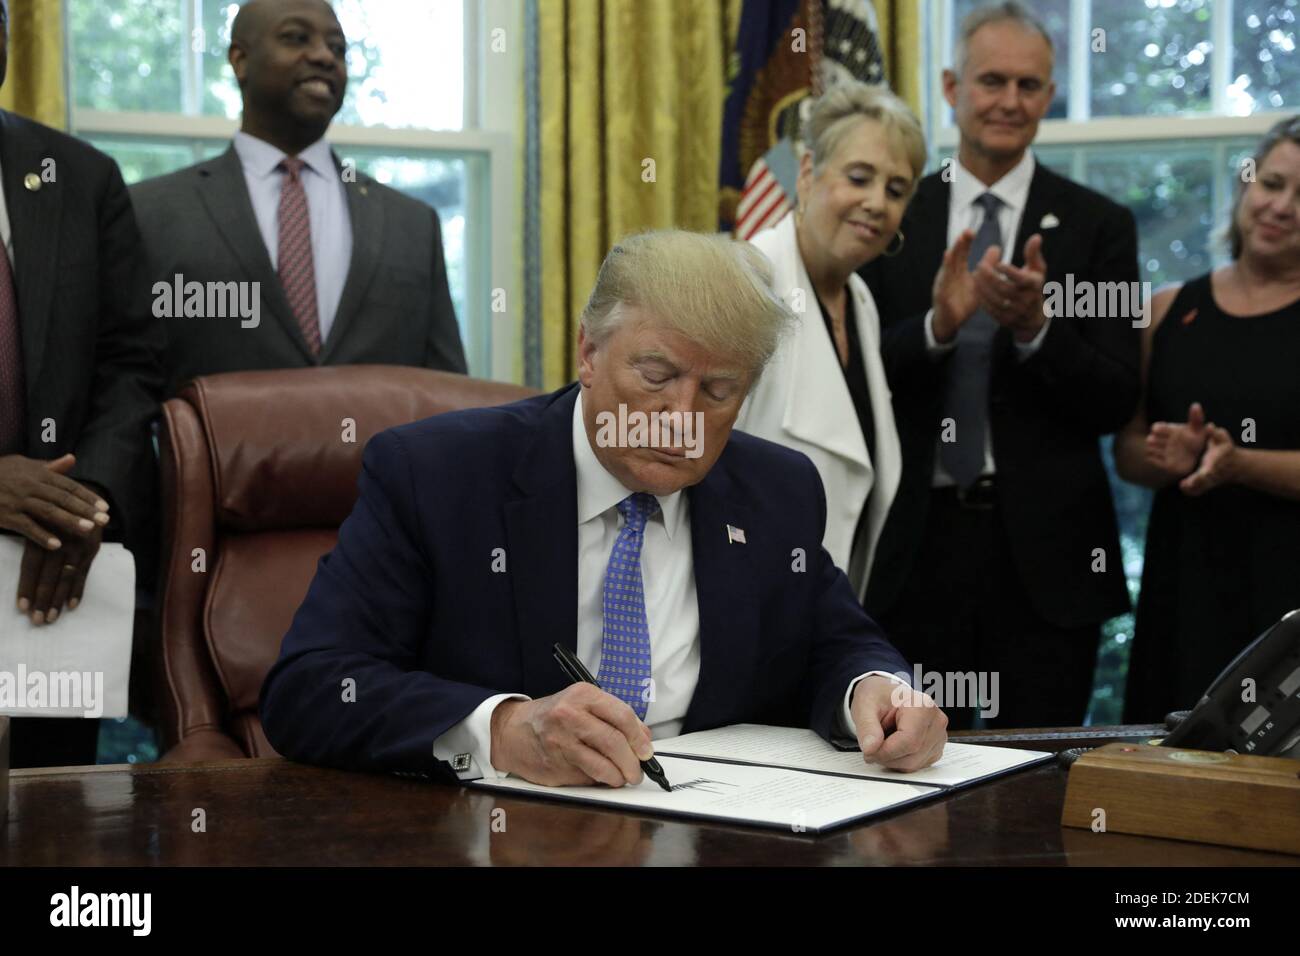 US President Donald Trump signs an Executive Order Establishing a White House Council on Eliminating Regulatory Barriers to Affordable Housing in the Oval Office at the White House in Washington, D.C., on June 25, 2019. Photo by Yuri Gripas/Pool/ABACAPRESS.COM Stock Photo